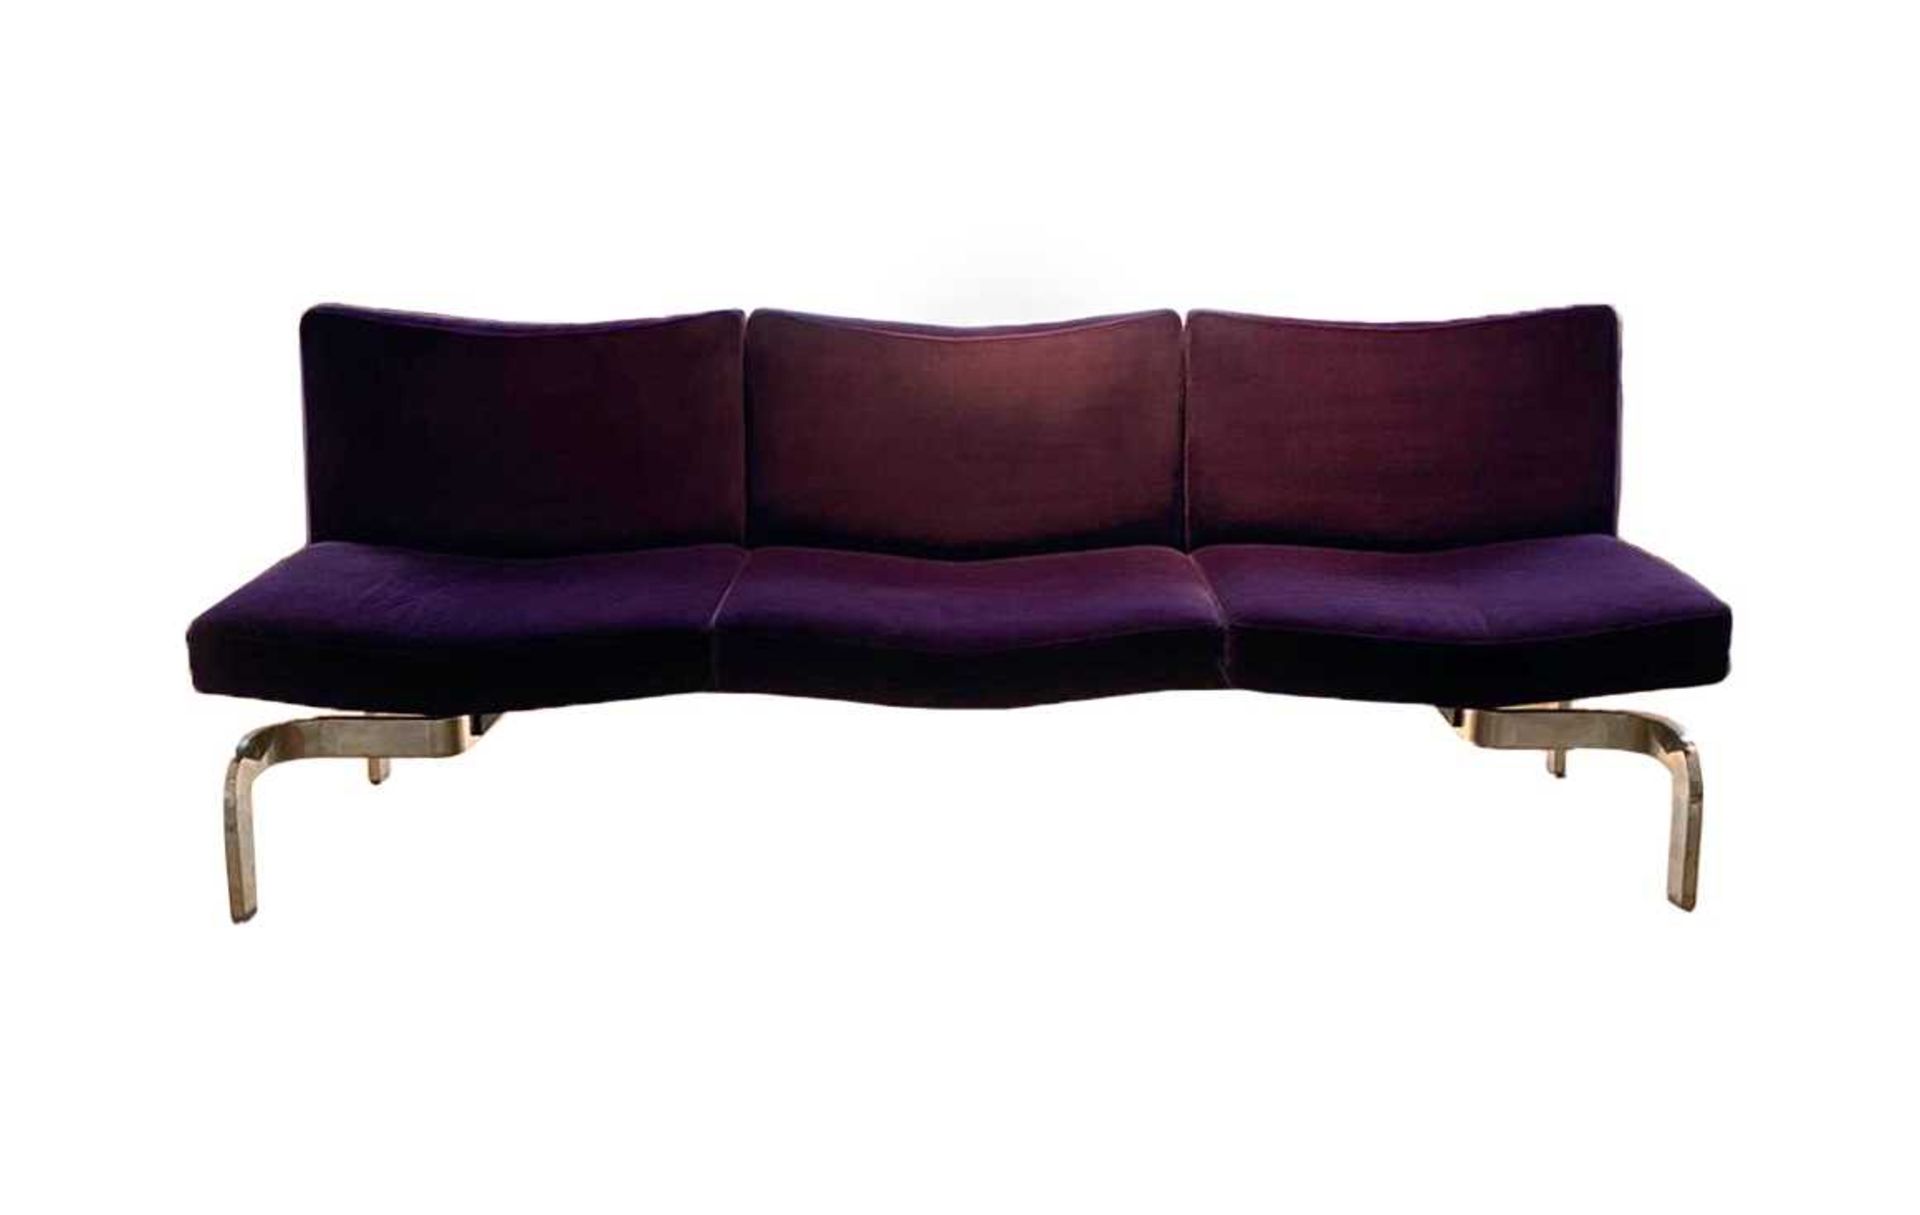 A pair of purple upholstered settees, - Image 4 of 4